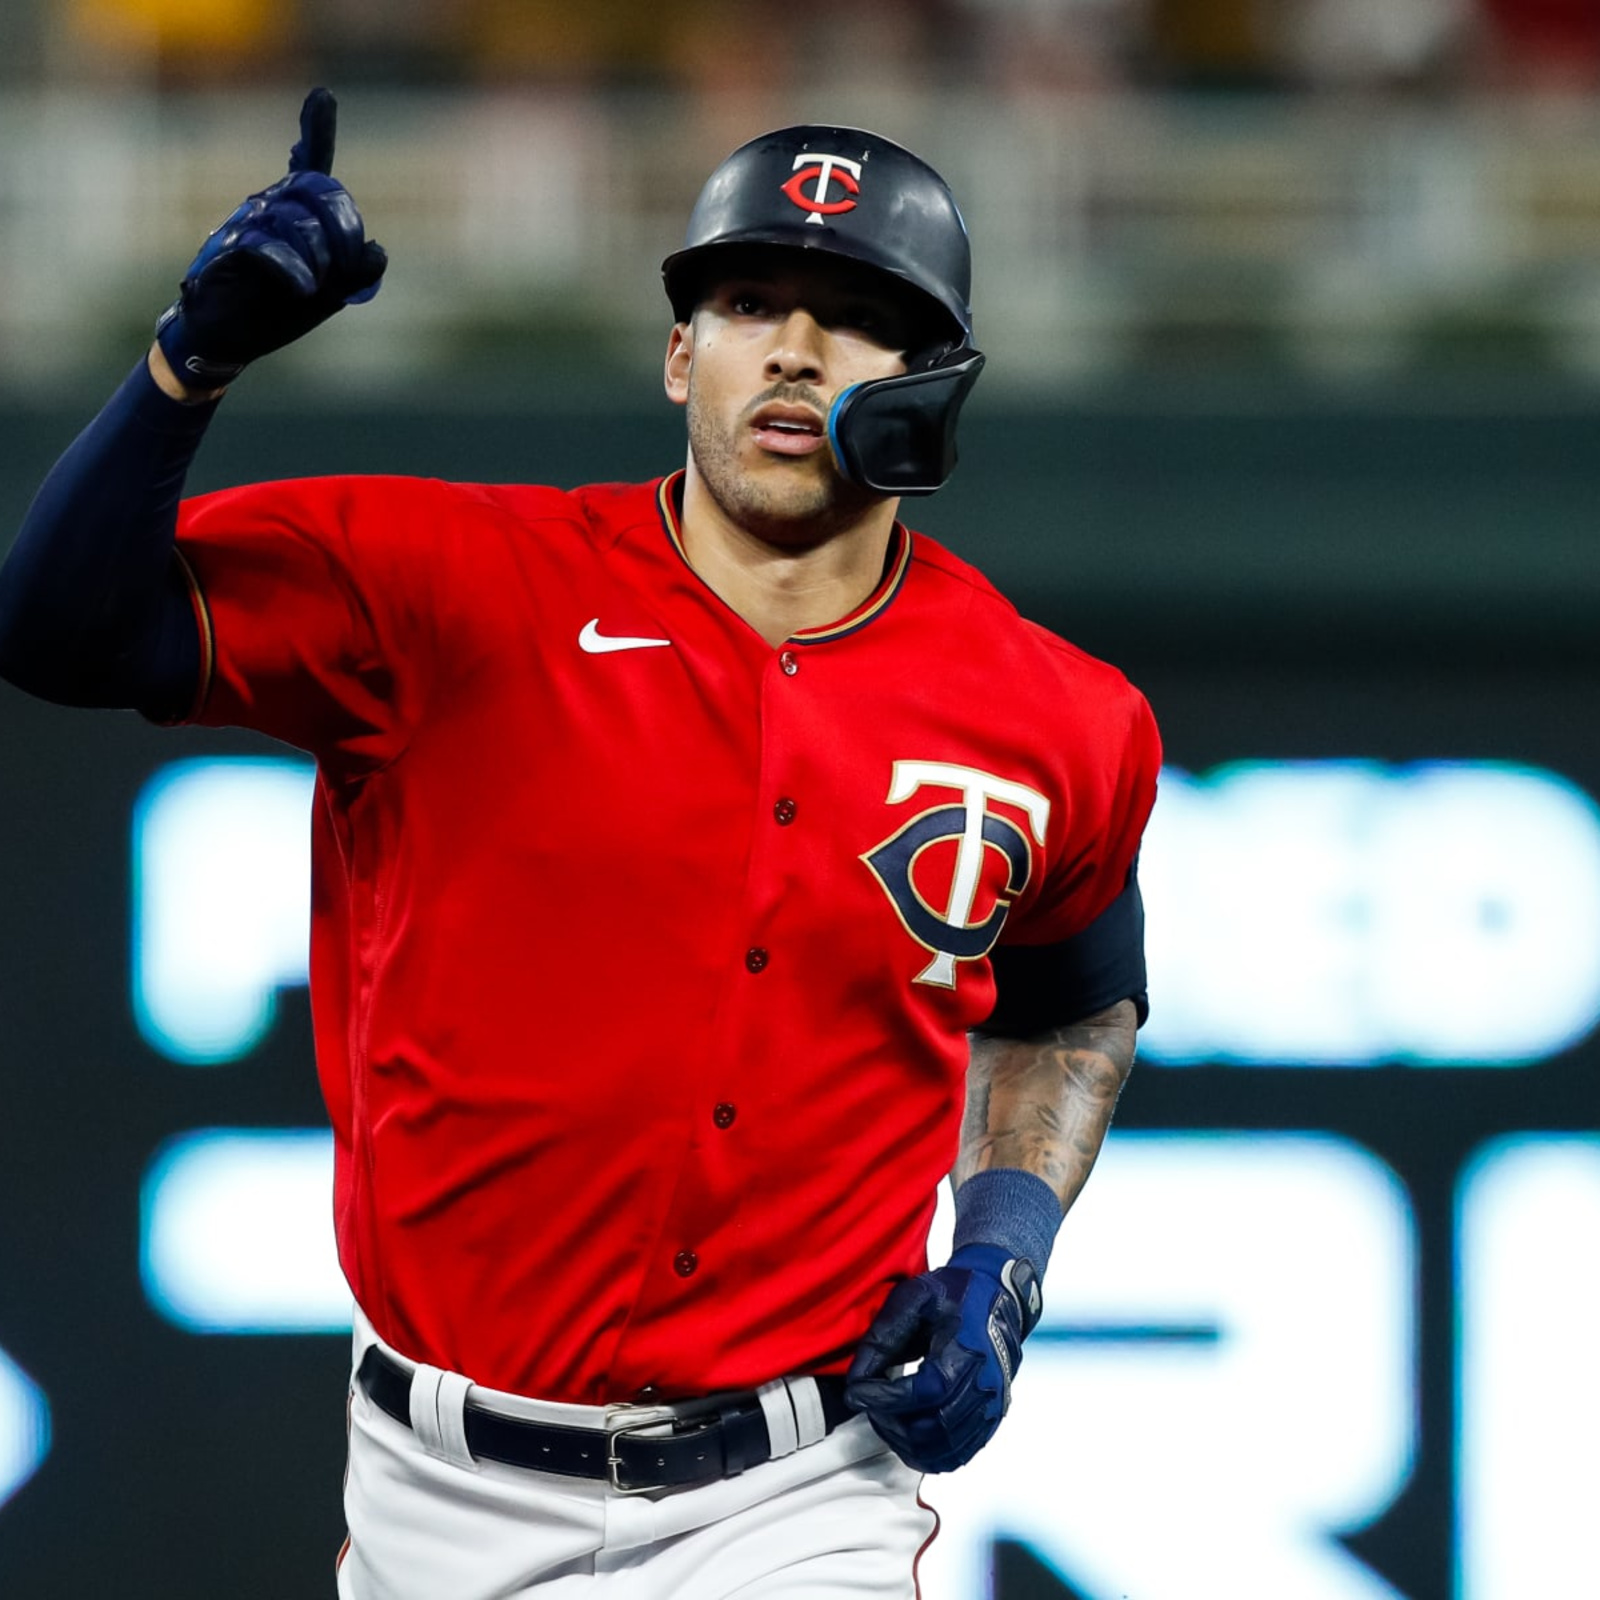 Twins shortstop Carlos Correa reaches $350M, 13-year deal with Giants